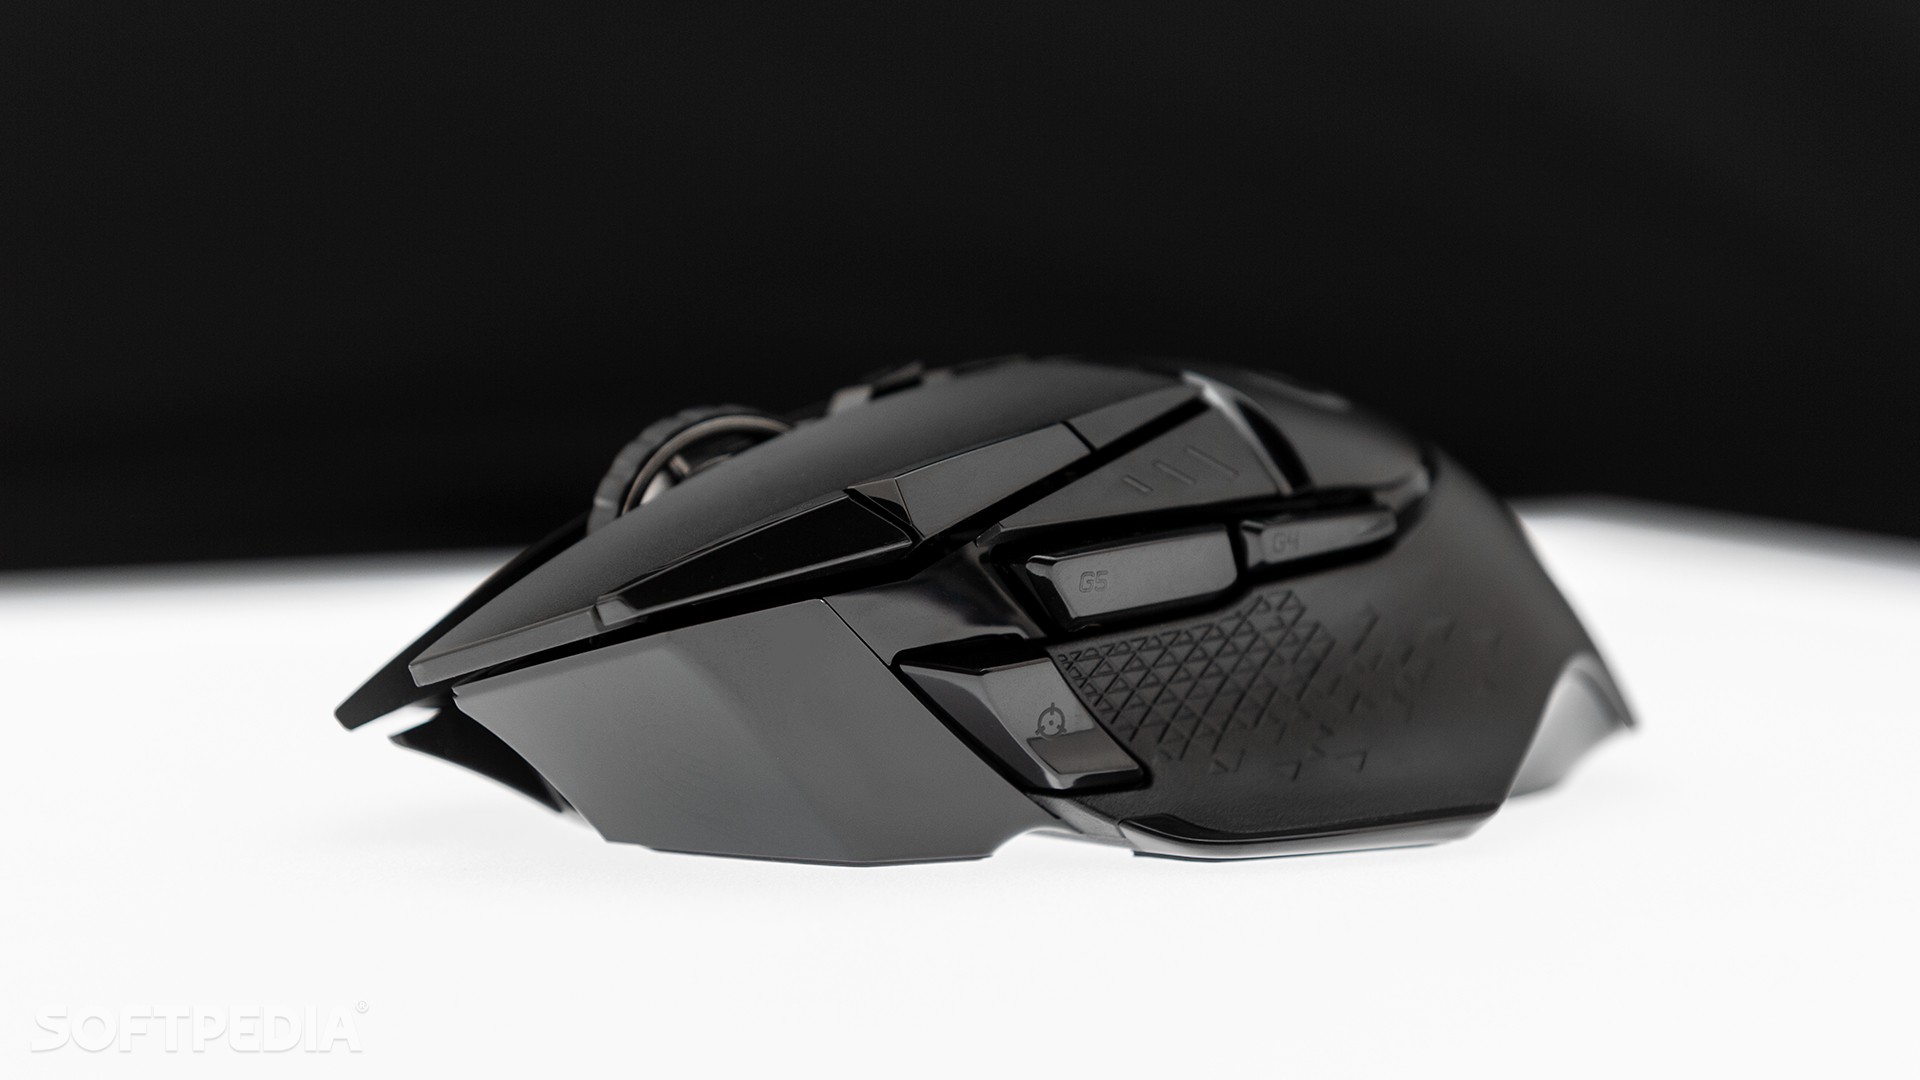 Logitech G502 Driver Linux : Logitech Wallpapers ·① WallpaperTag / This mouse takes personal ...